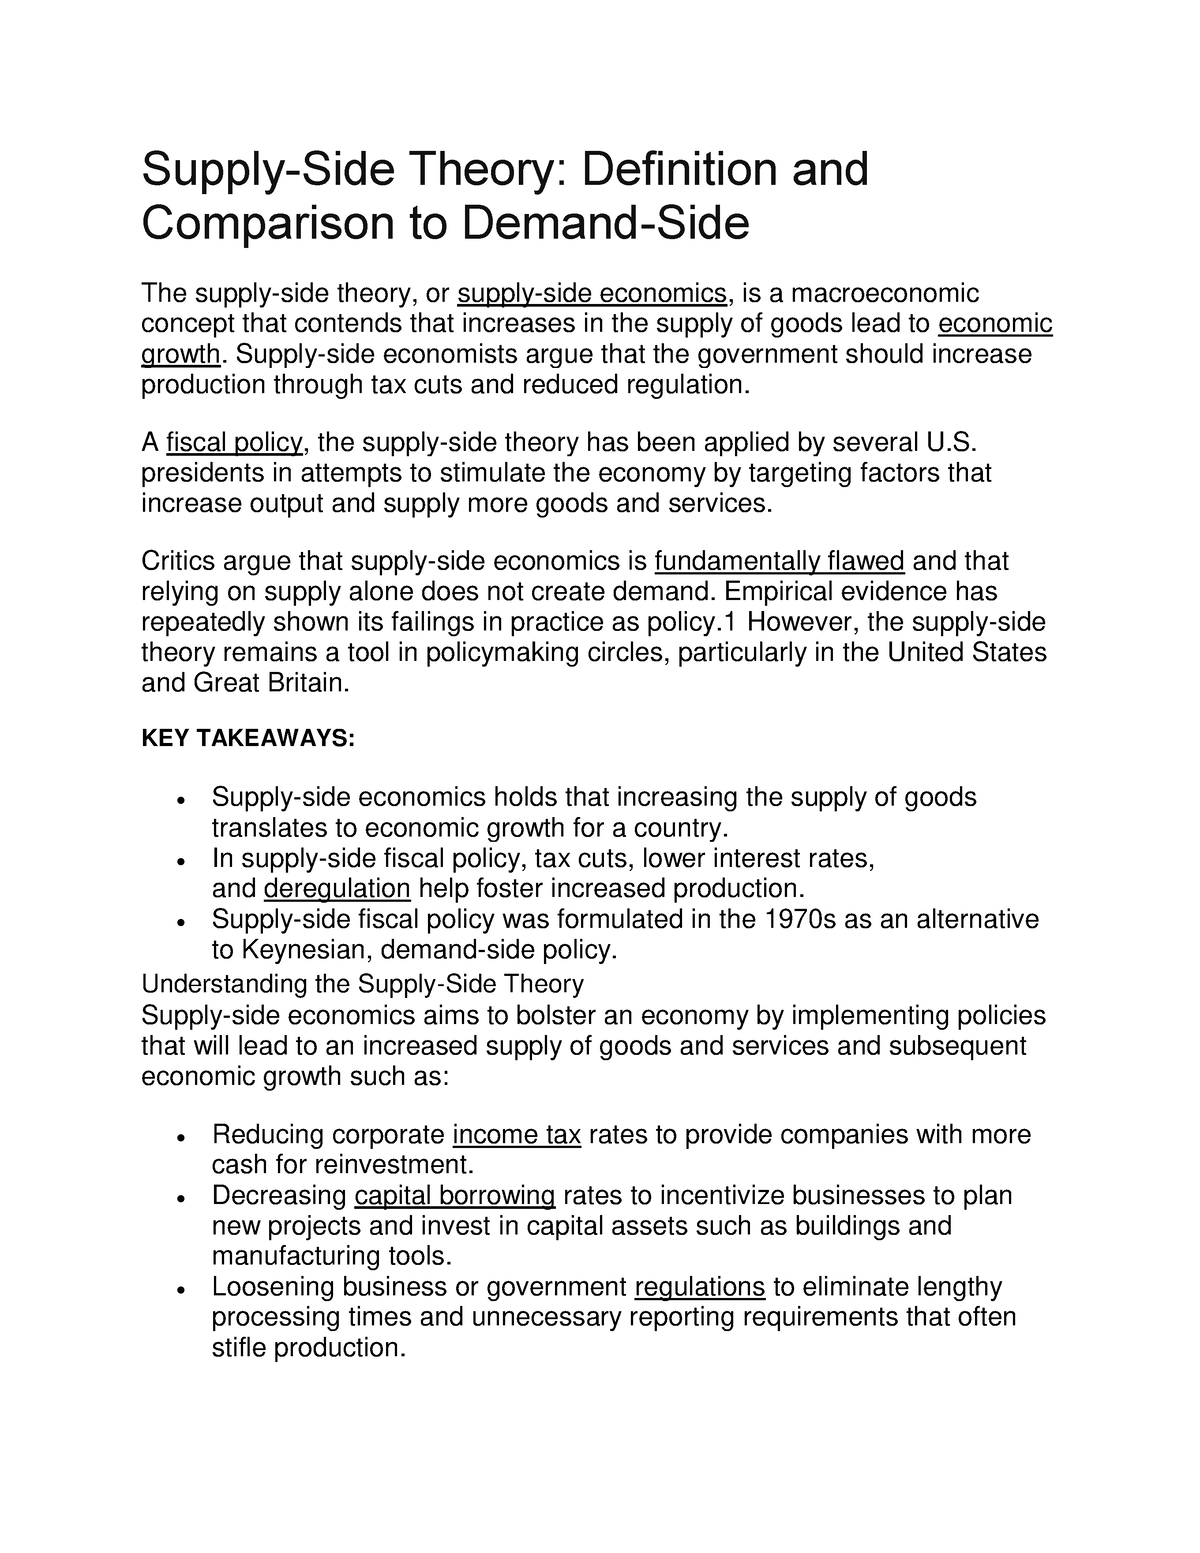 Supply-Side Theory: Definition and Comparison to Demand-Side